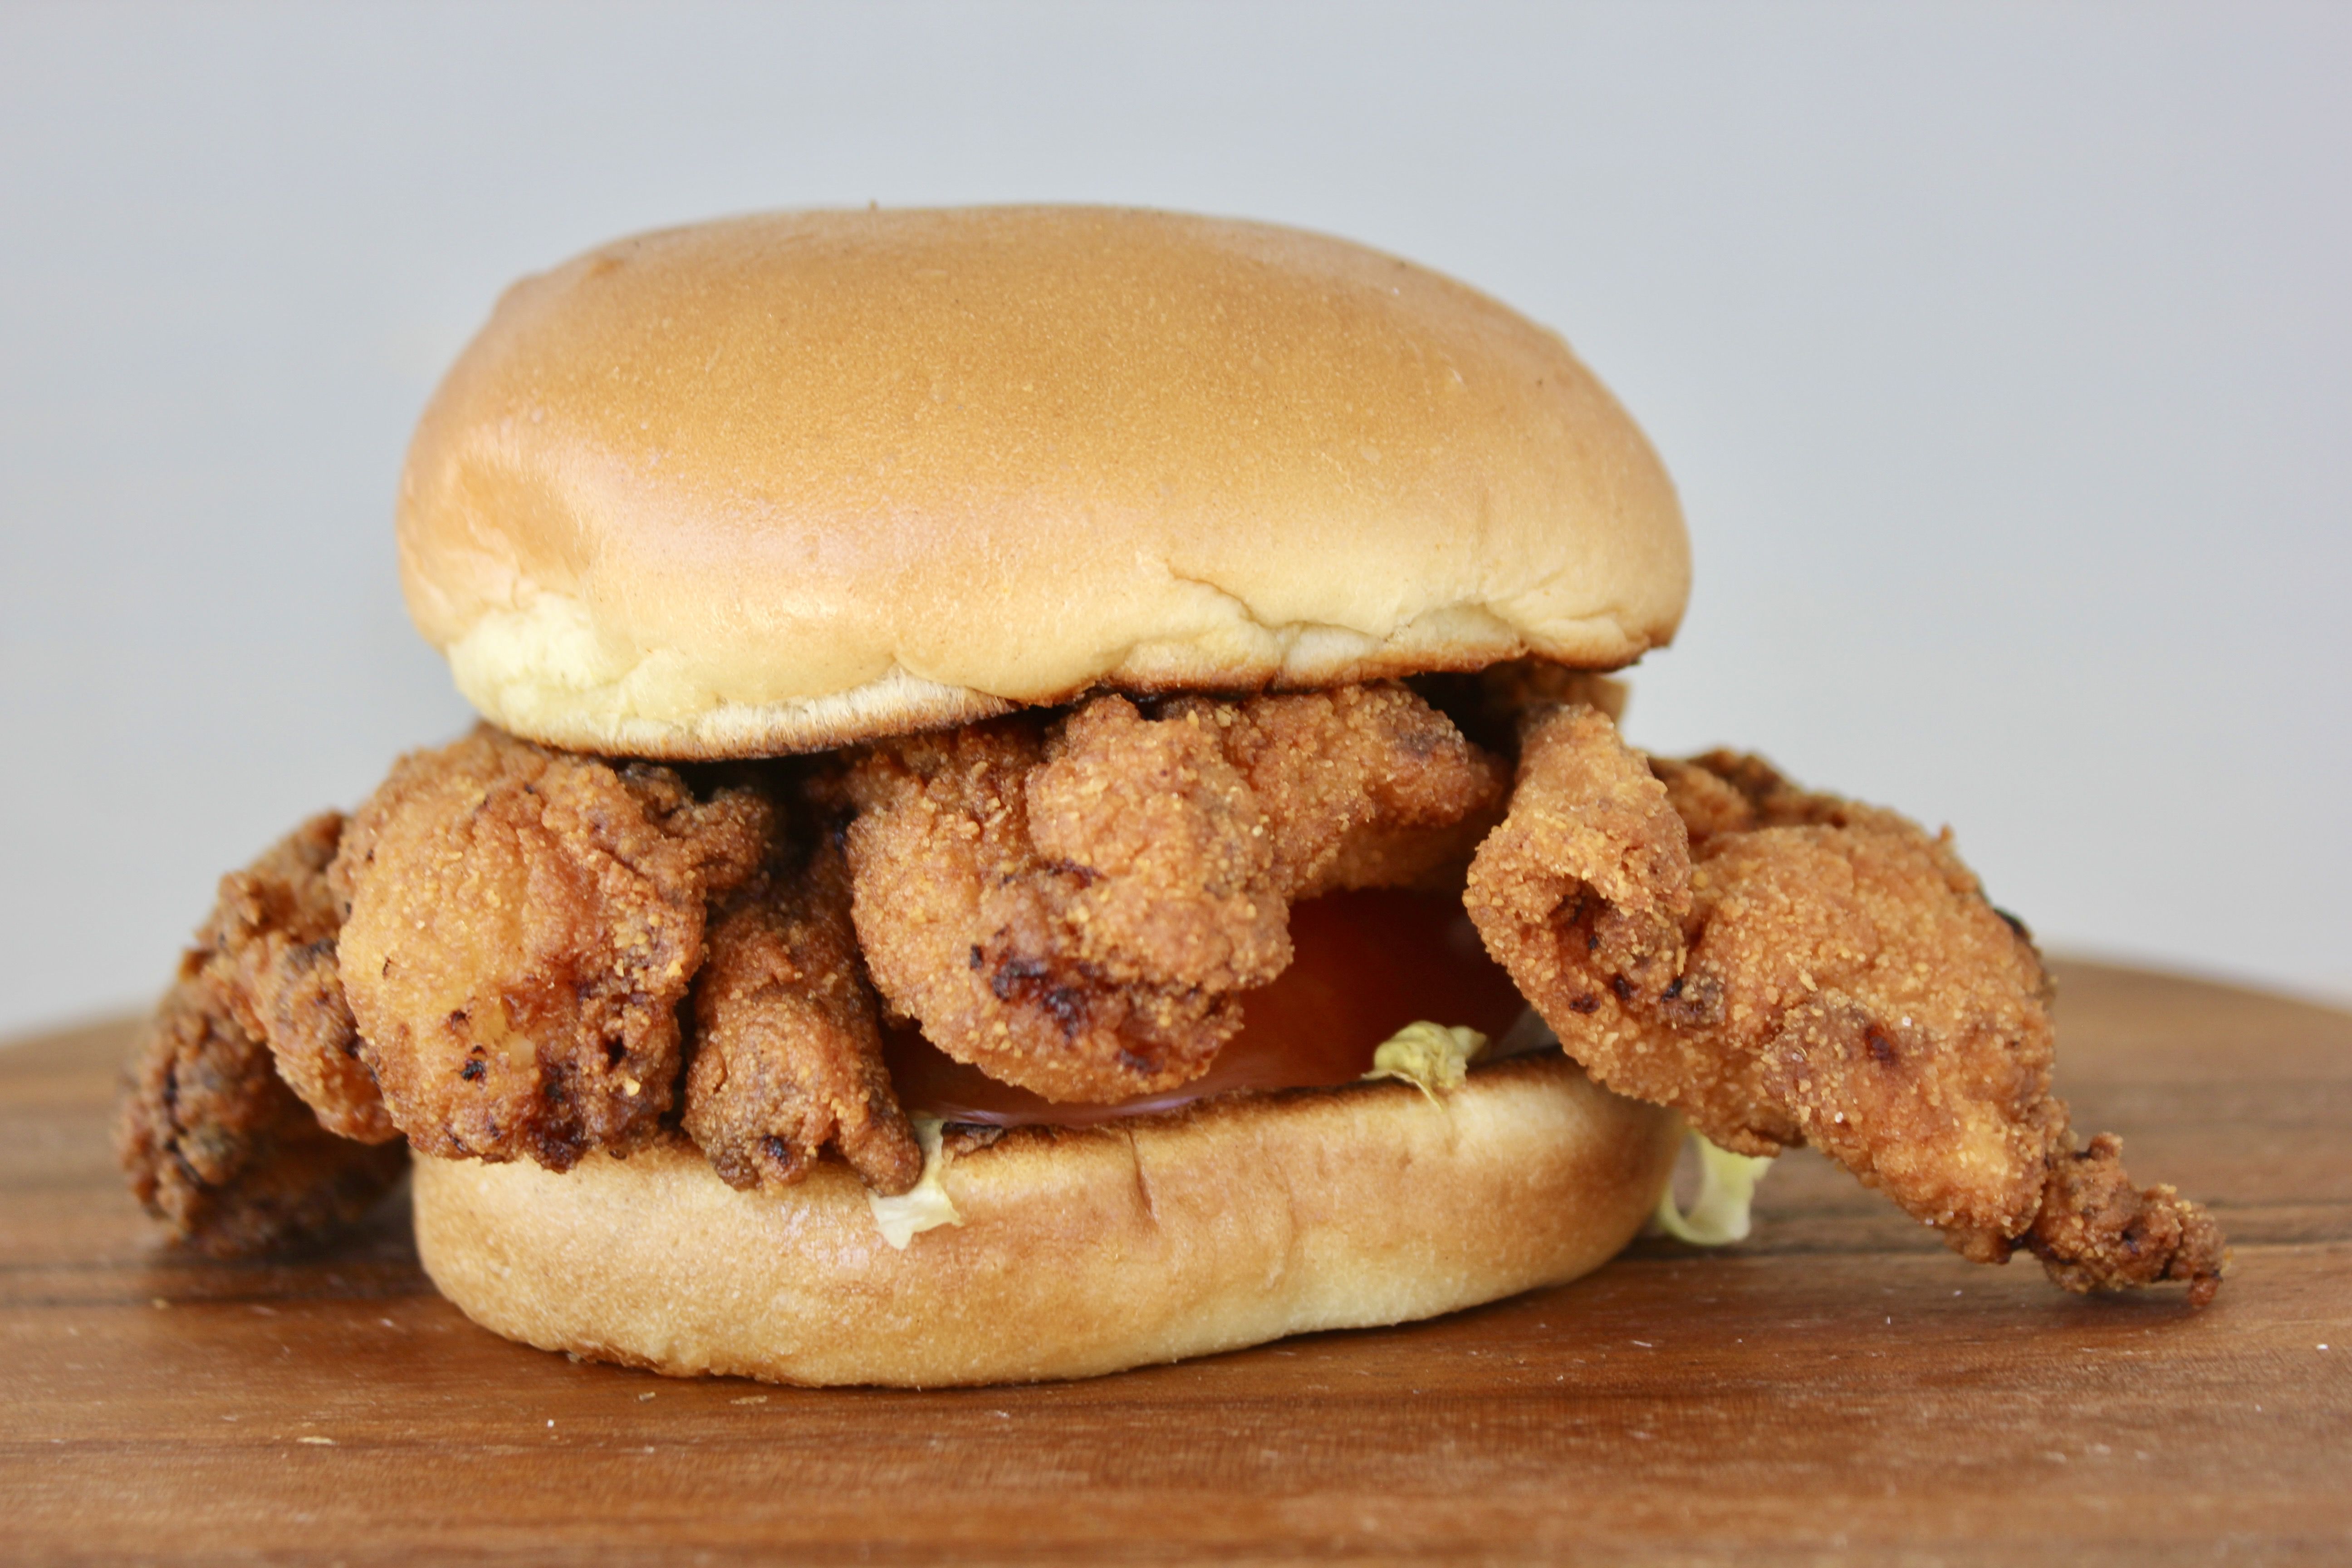 A fried chicken sandwich from The Station on Ingersoll.